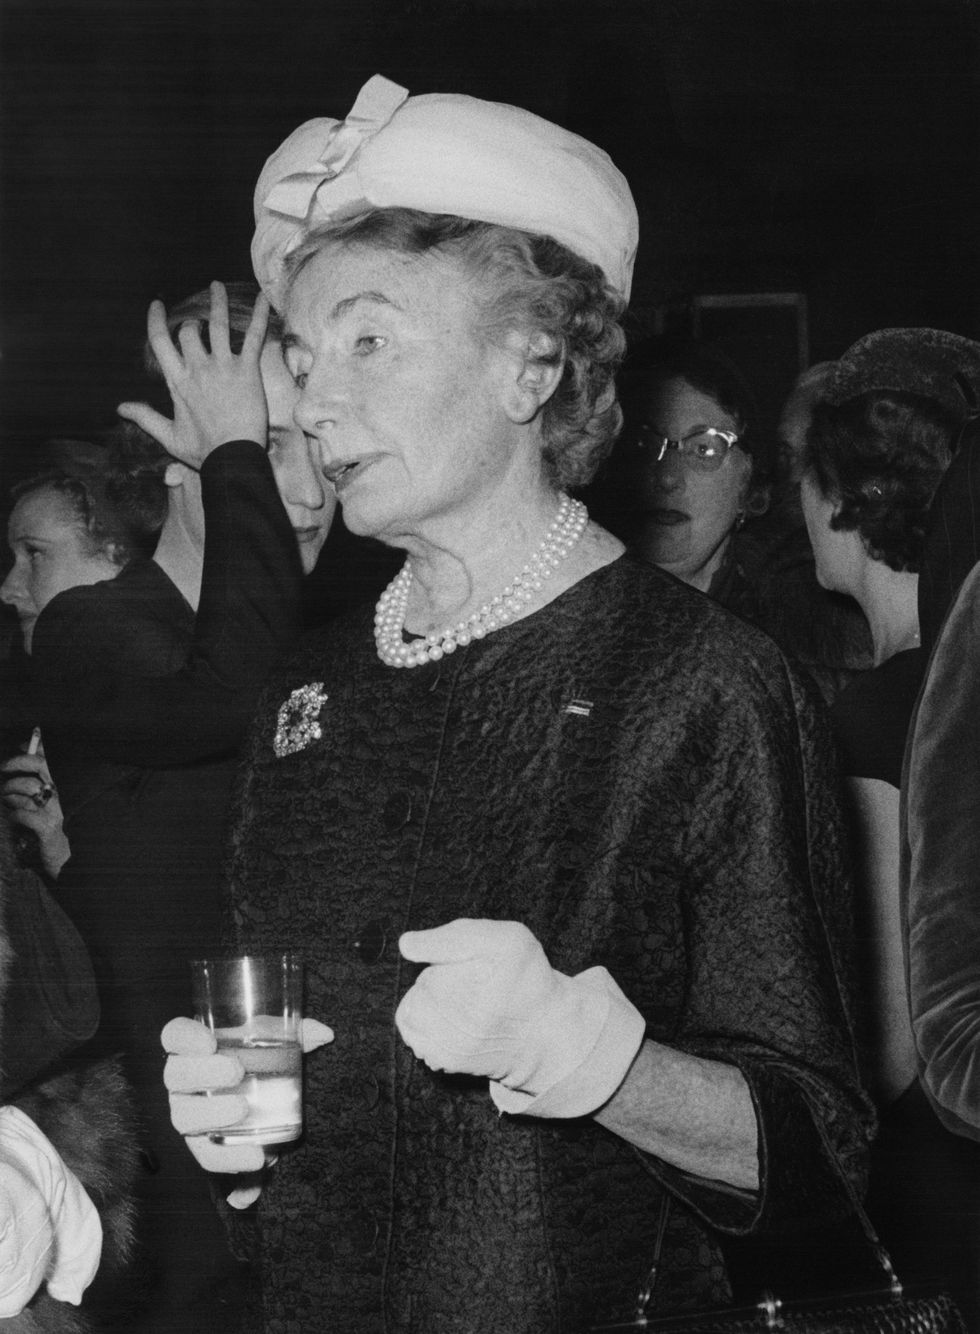 american fashion journalist carmel snow 1887 1961 attends a function in london, 23rd january 1956 snow is editor of the american edition of the magazine harper's bazaar photo by daily expressarchive photosgetty images